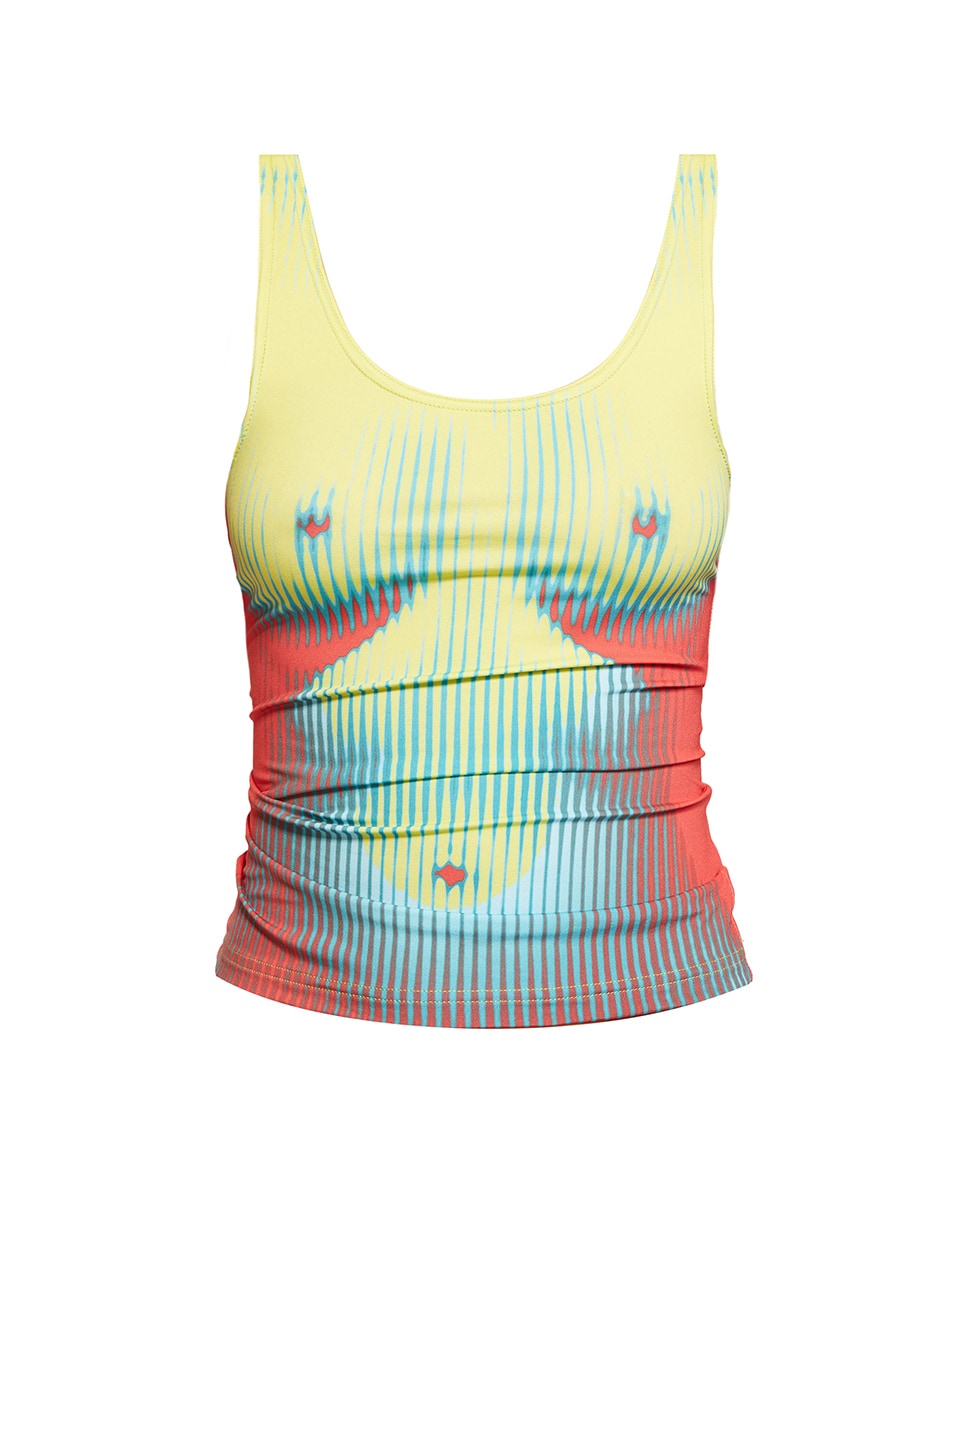 Image 1 of Y/Project x Jean-Paul Gaultier Body Morph Tank Top in Yellow, Red, & Blue